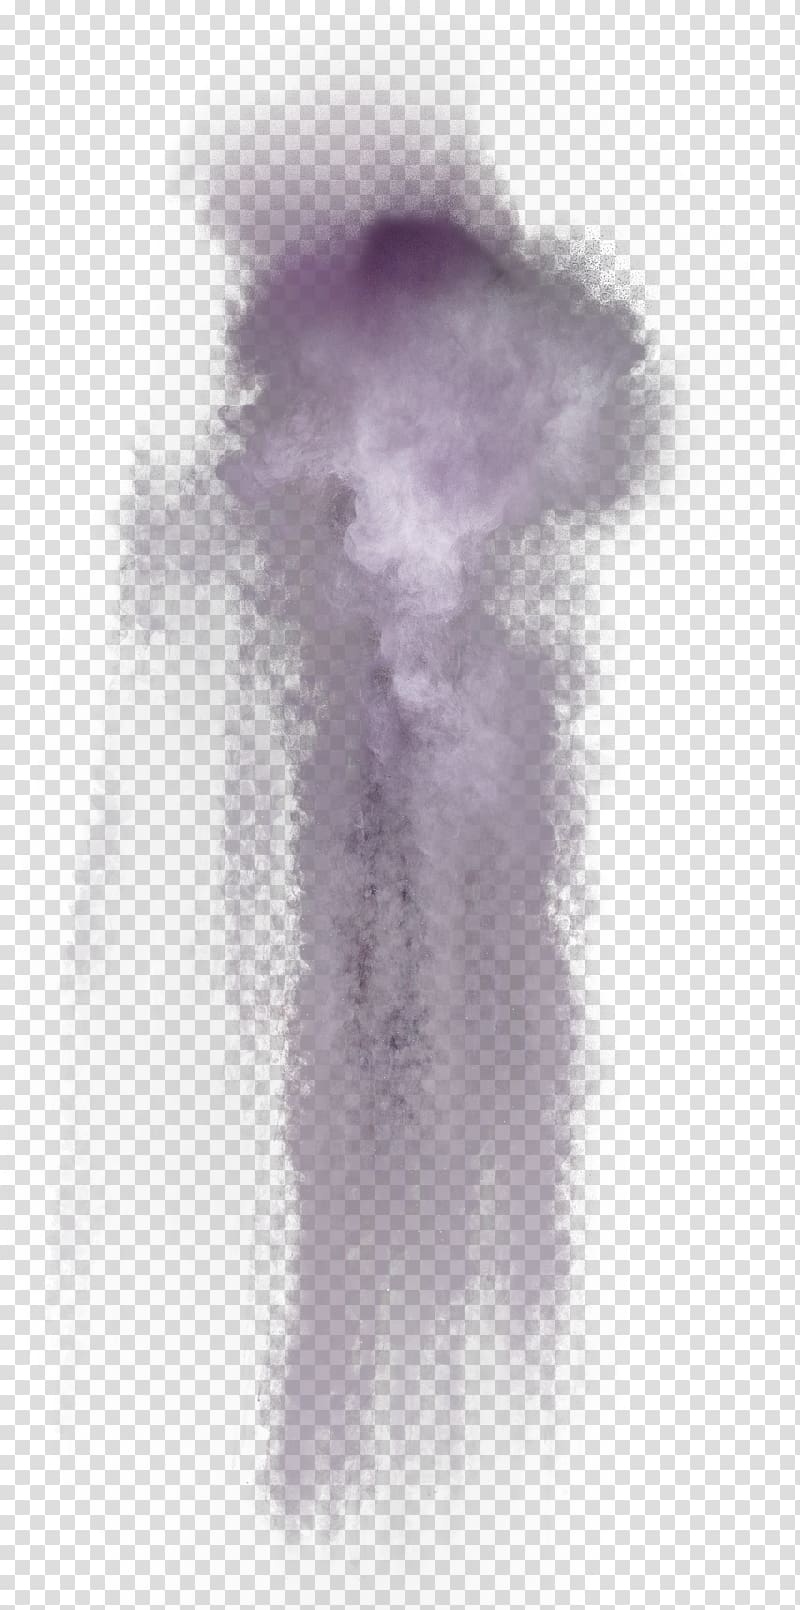 gray smoke, Powder Google Dust explosion, Purple powder explosive material transparent background PNG clipart